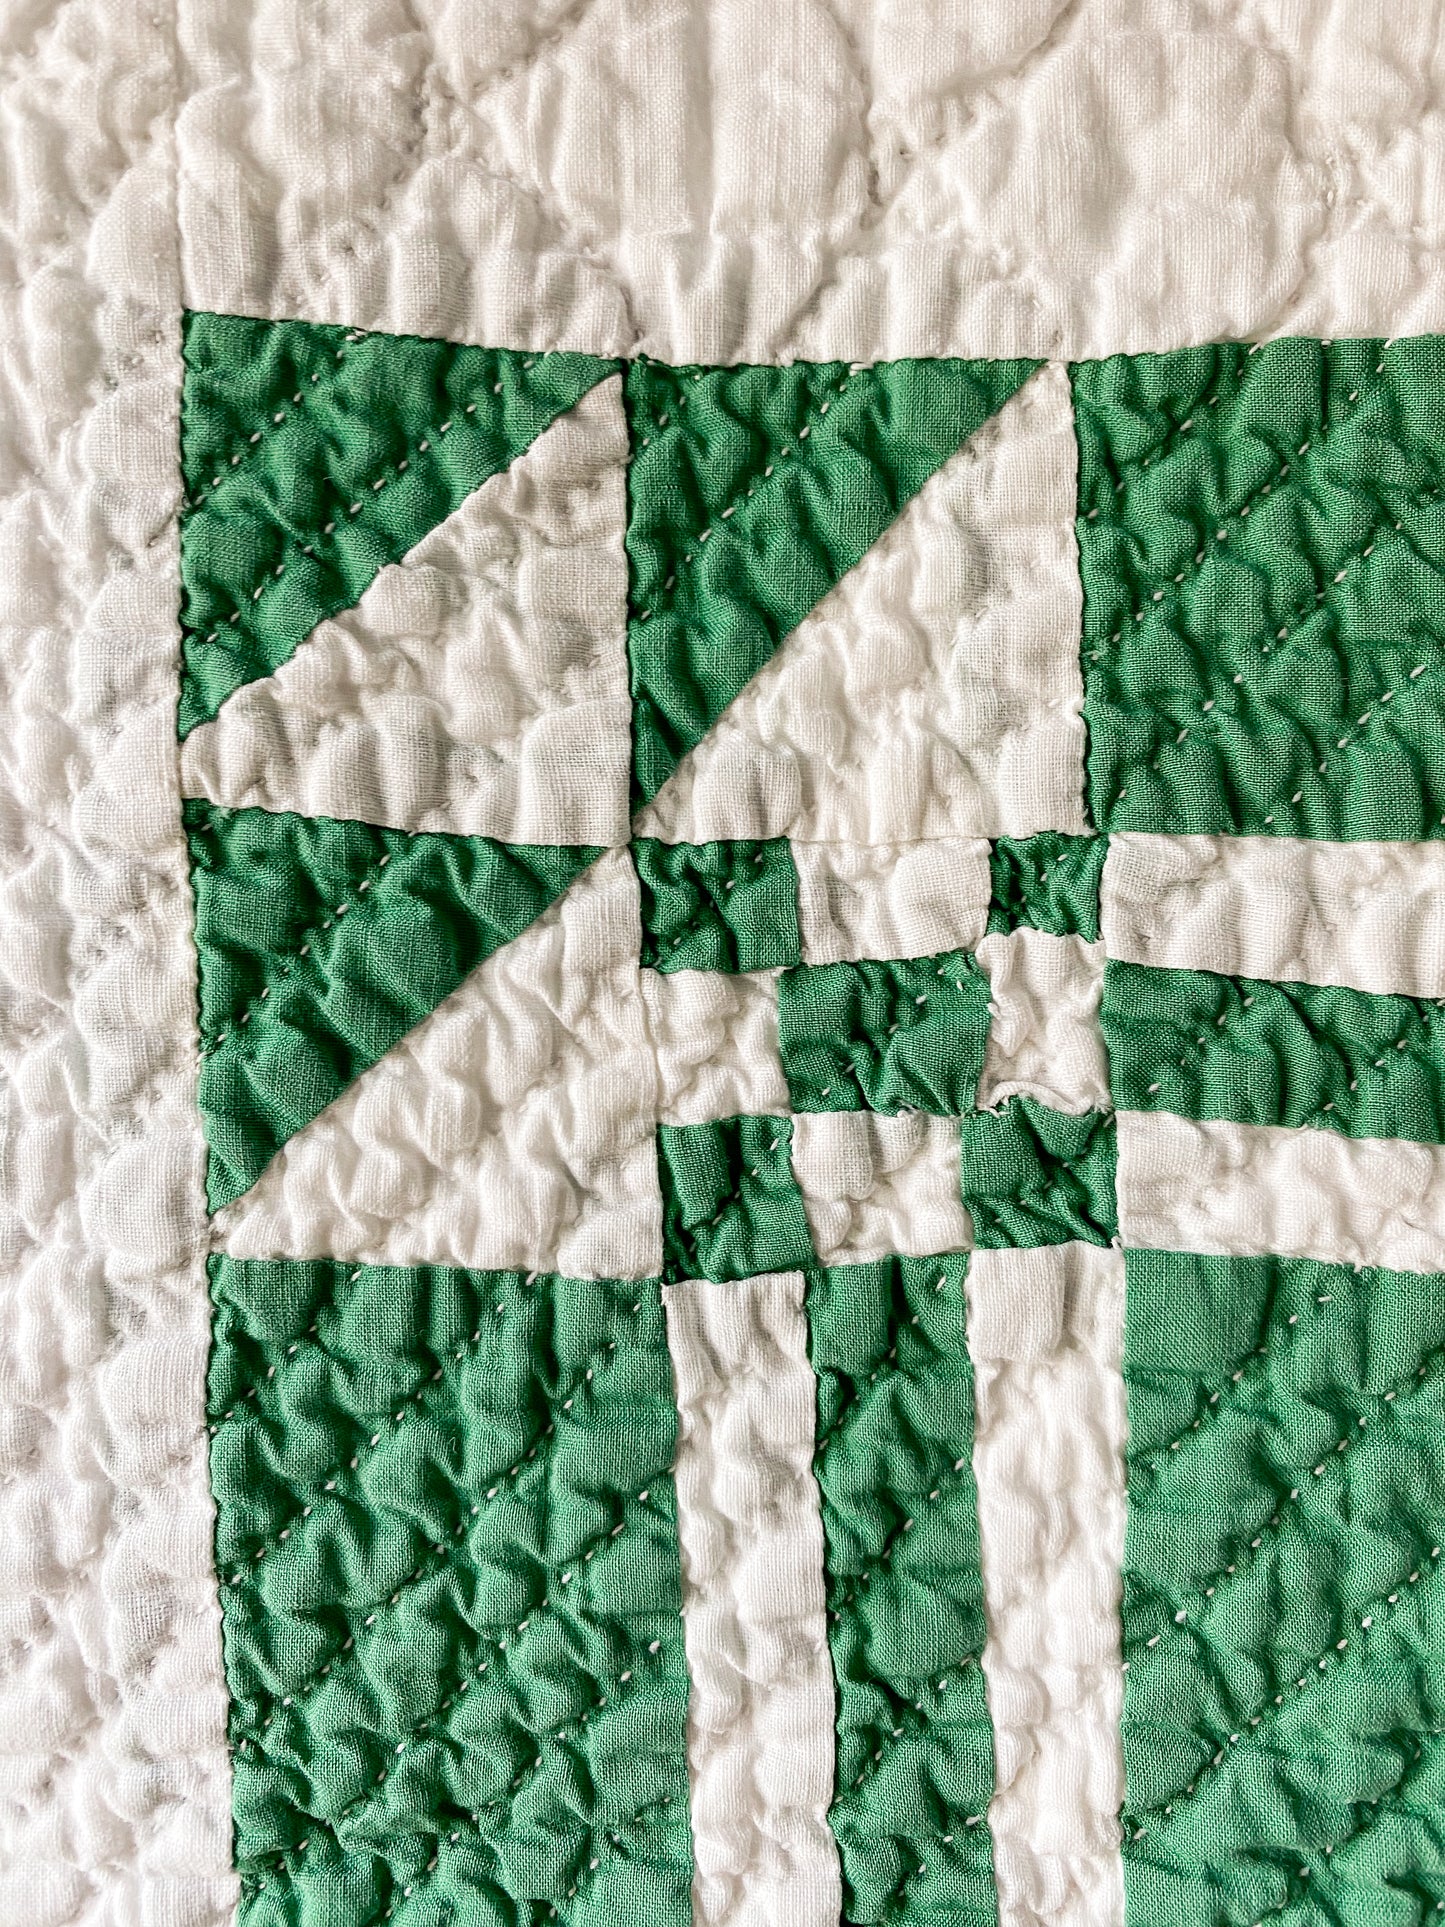 Vintage Green and White Goose in the Pond Quilt